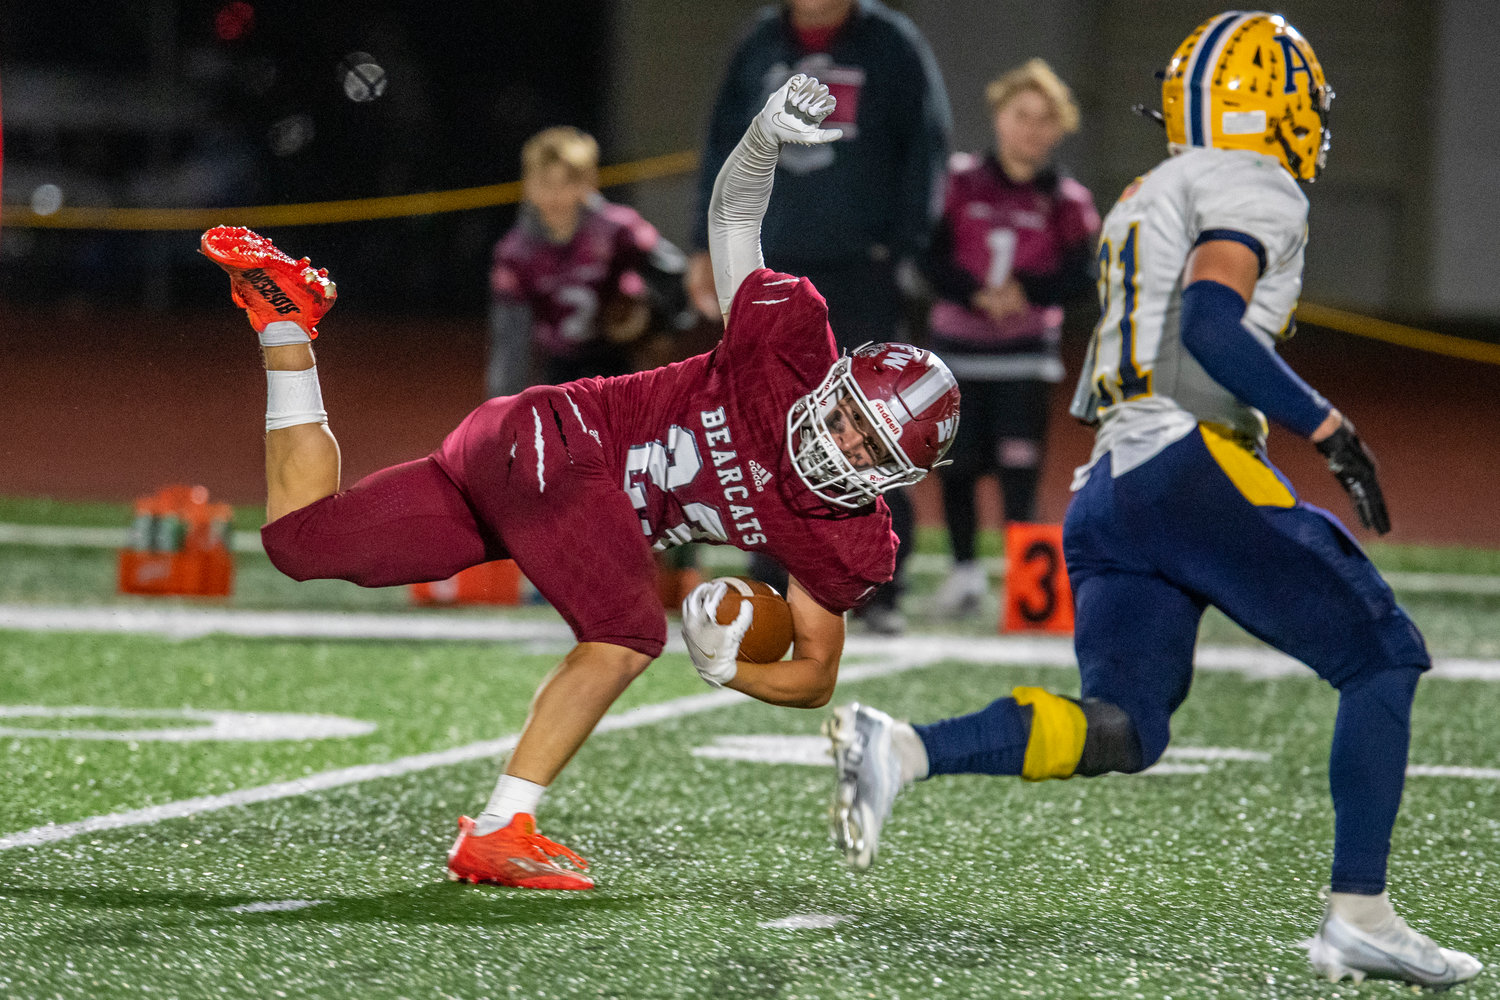 W.F. West's Evan Stajduhar (23) falls after hauling in a reception against Aberdeen at South Bend High School on Oct. 20.